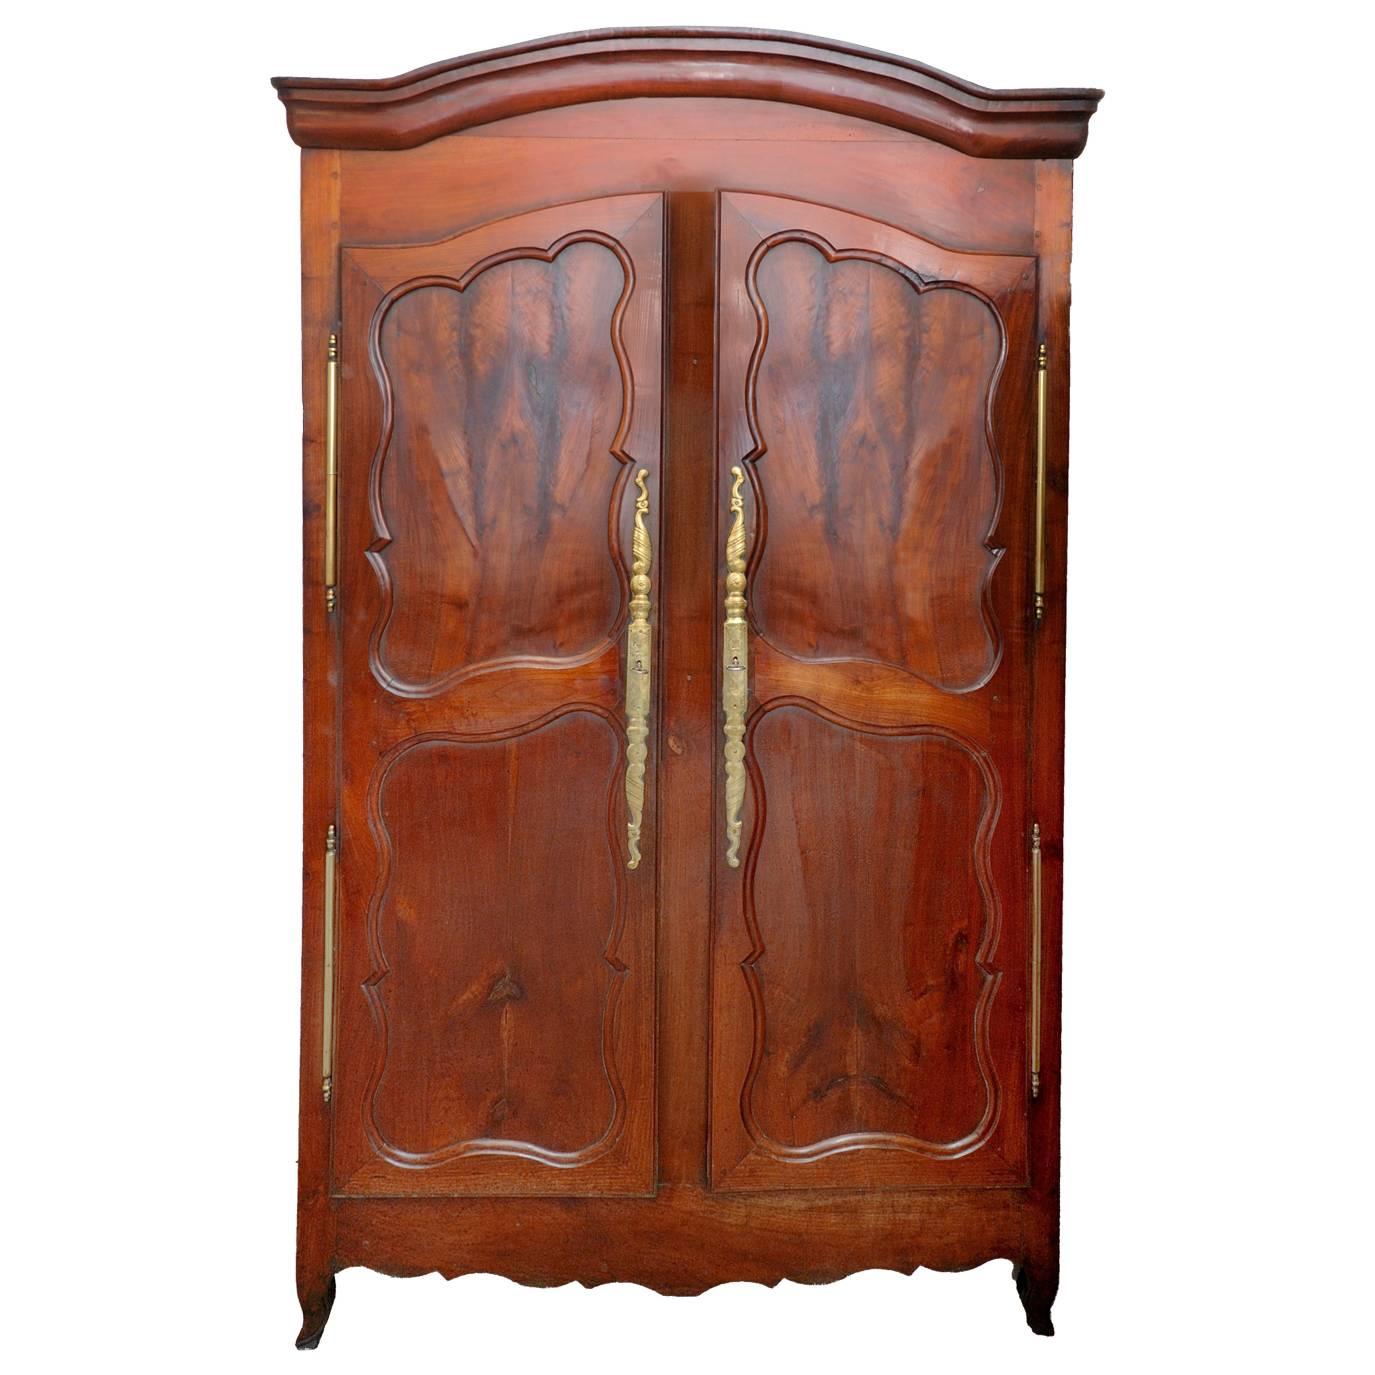 Tall French 18th Century Louise xv Cherrywood Armoire Cupboard, circa 1750 For Sale